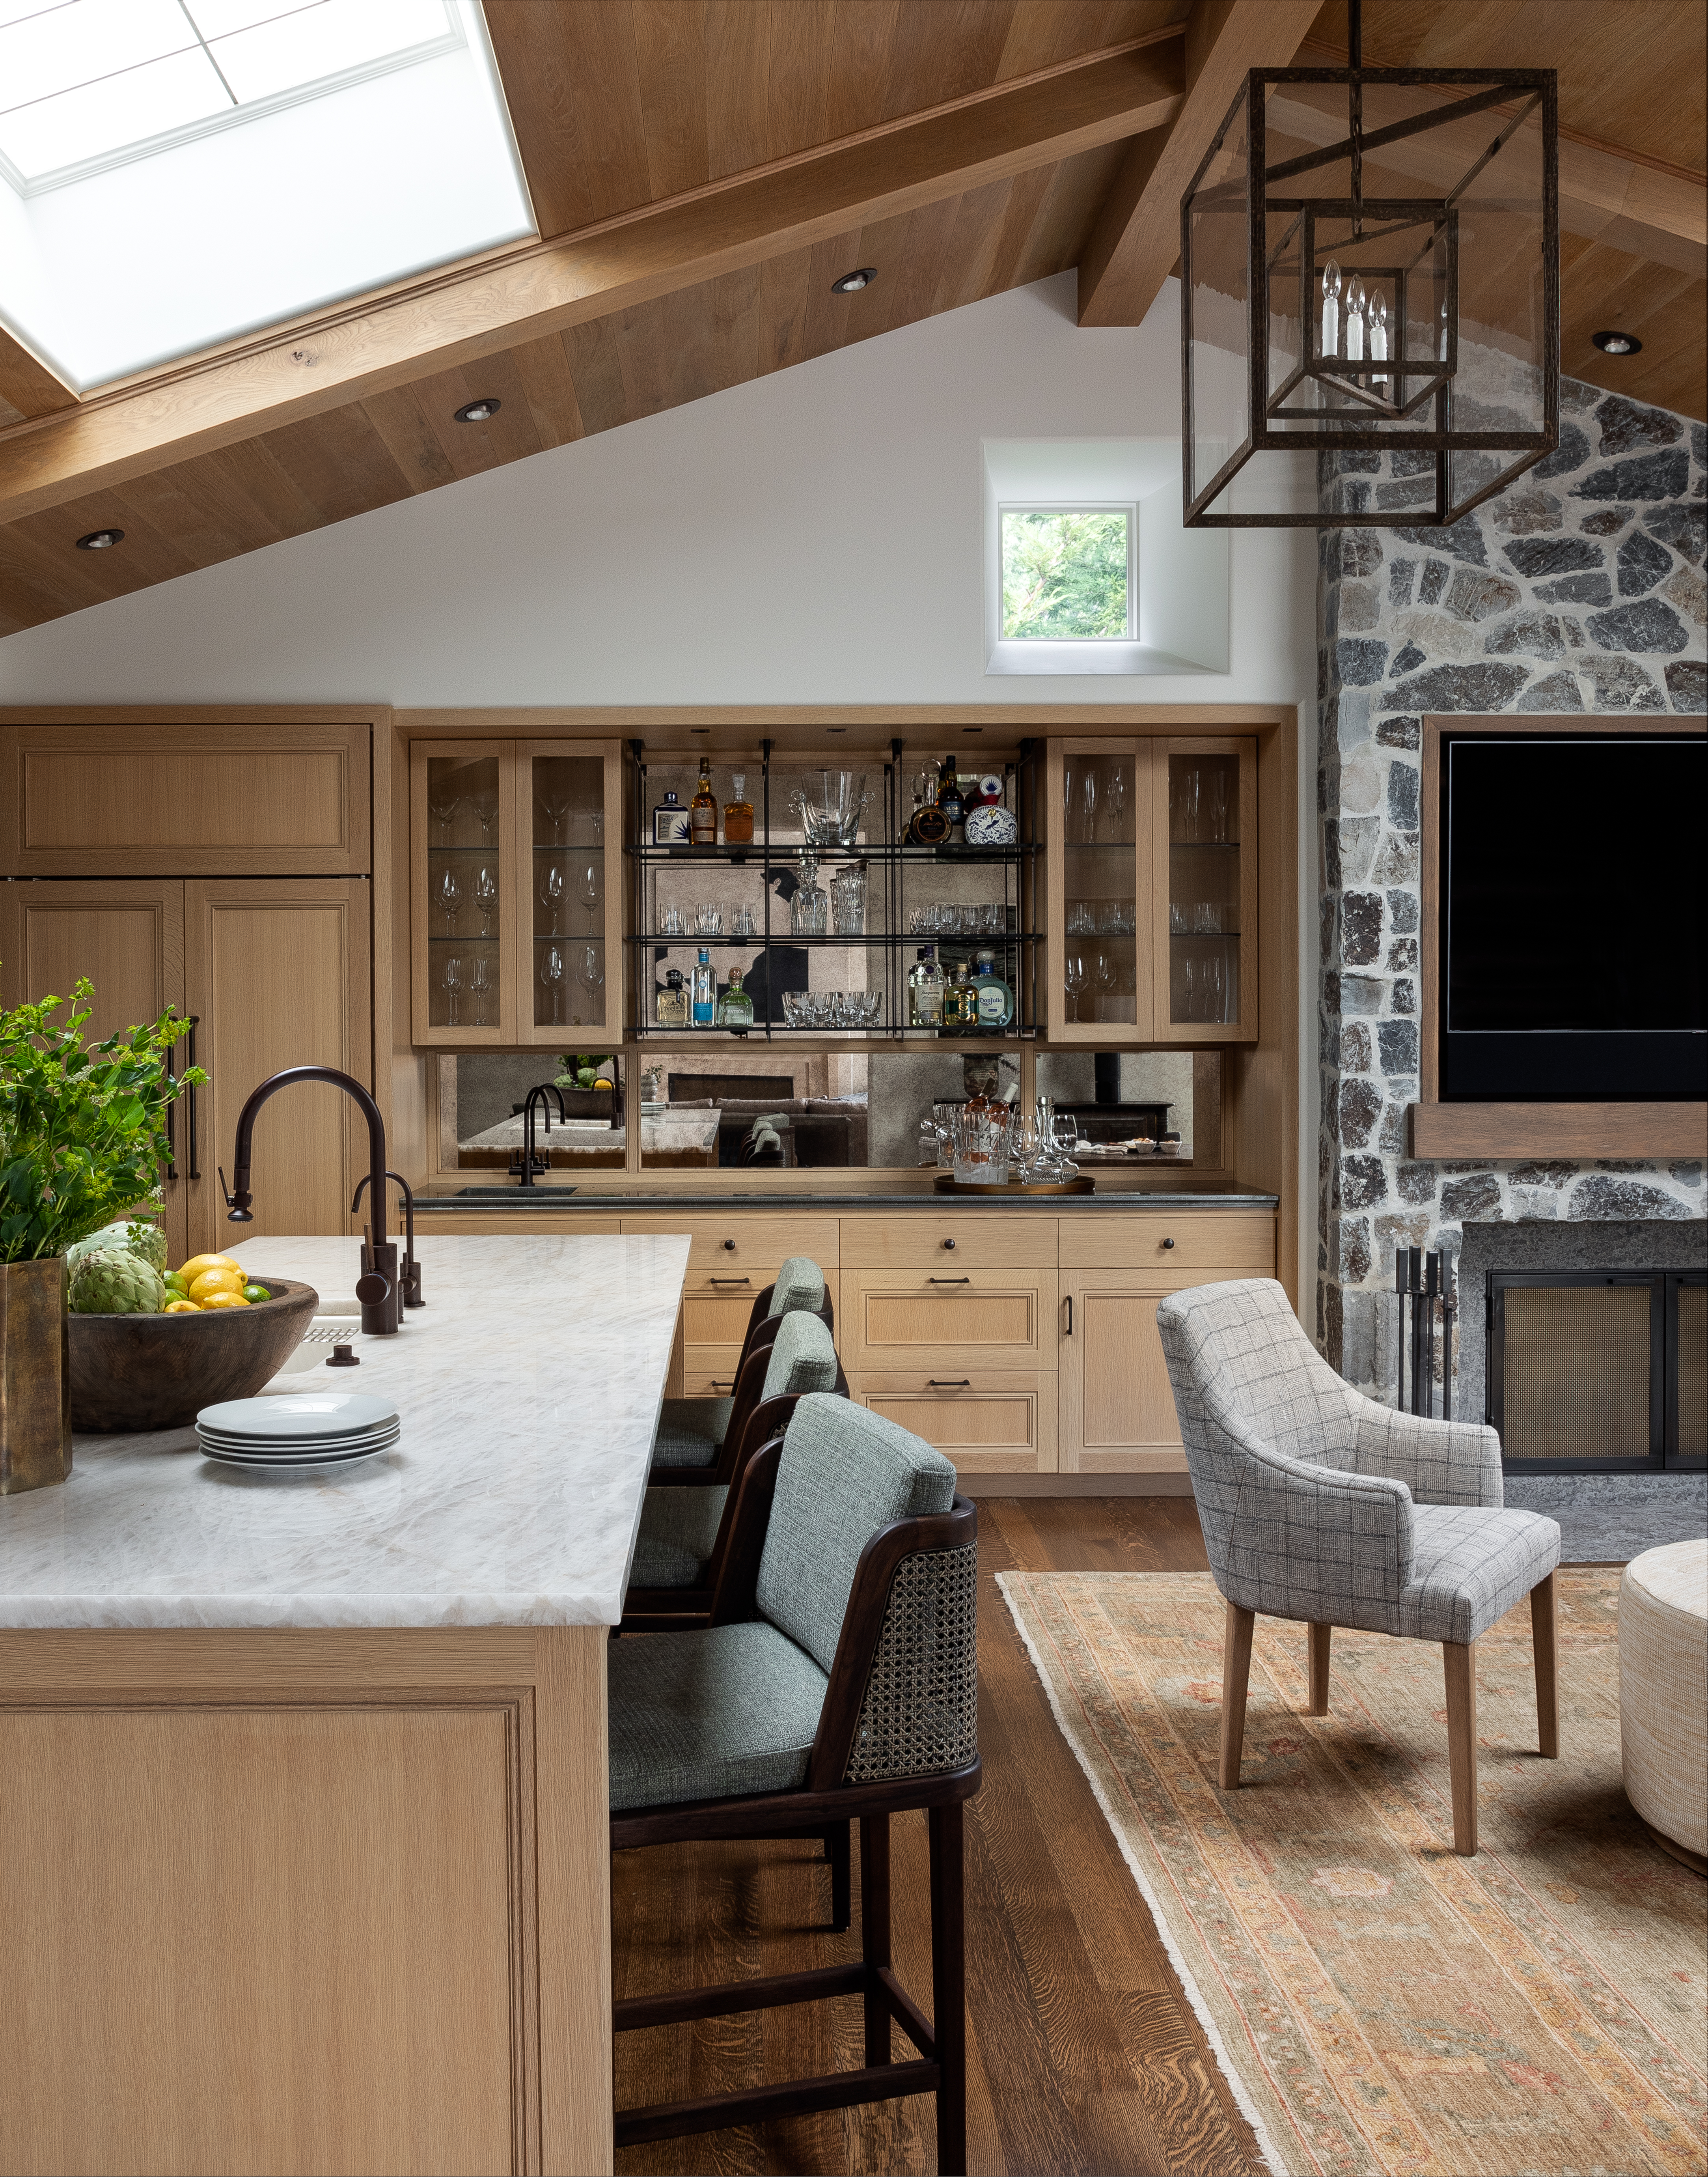 The kitchen-dining area was given a sense of age with the addition of a stone wall, fireplace, paneling, and beams.